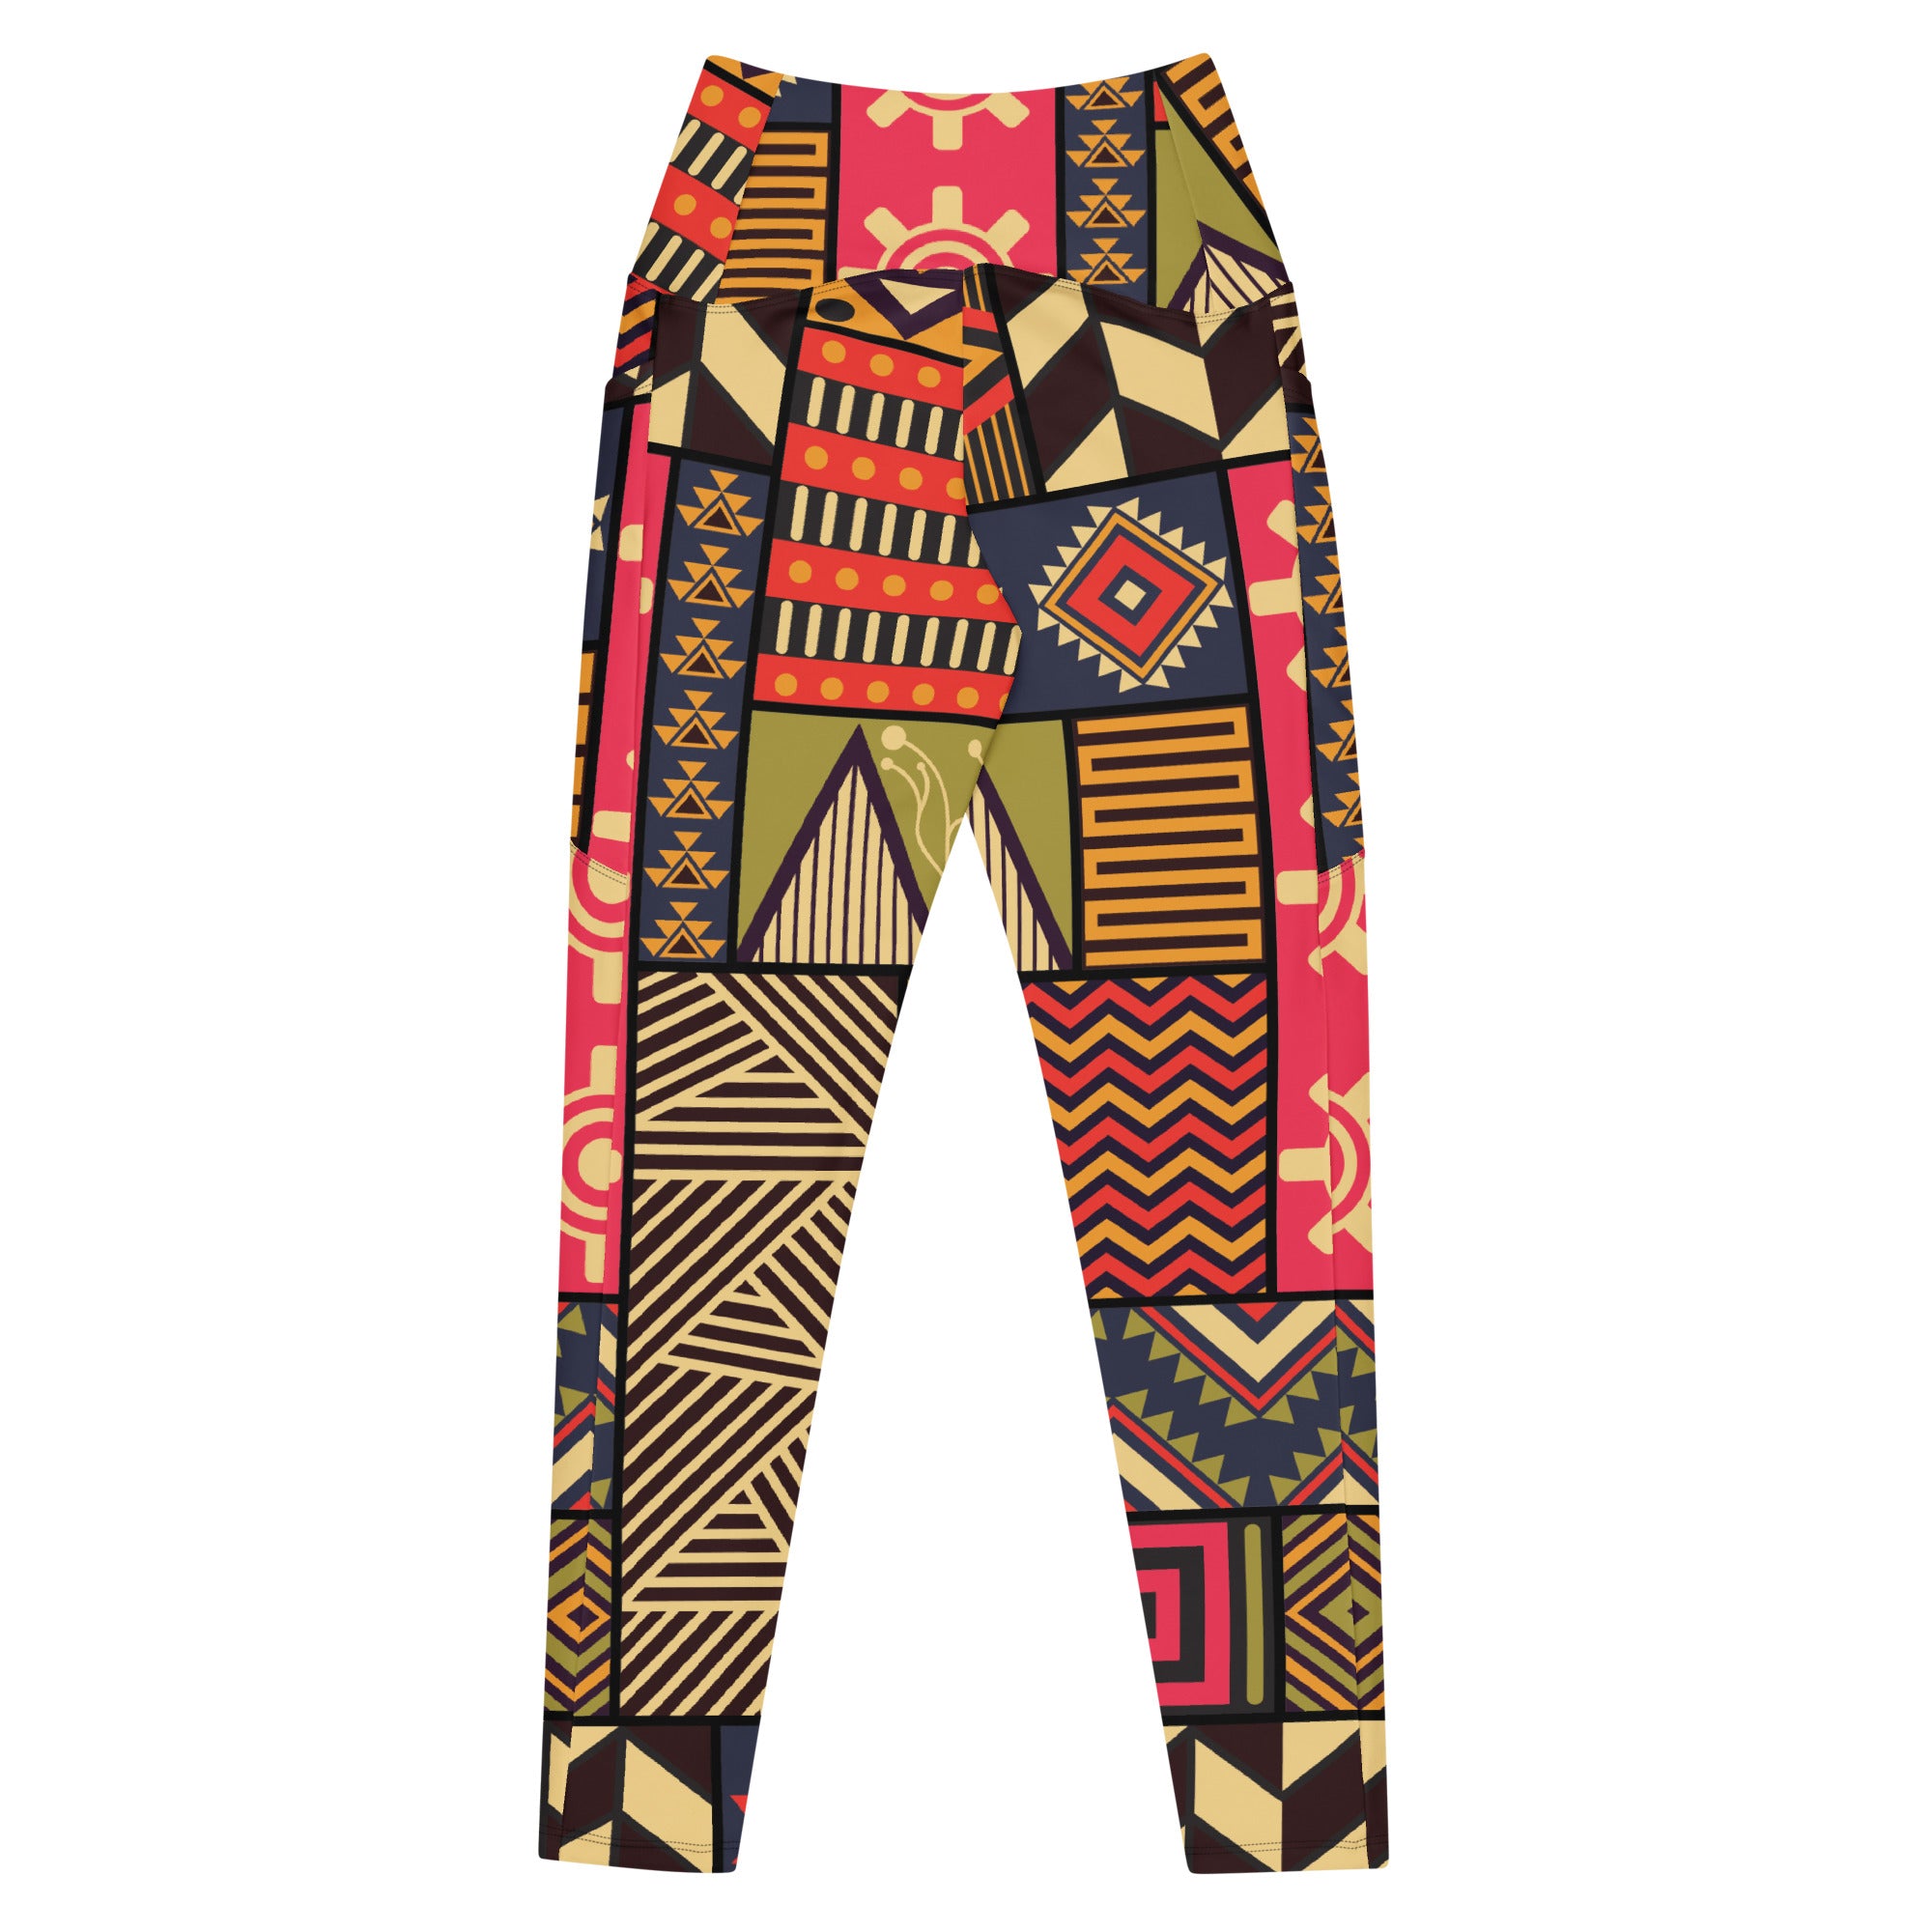 Africa Flare Crossover leggings with pockets